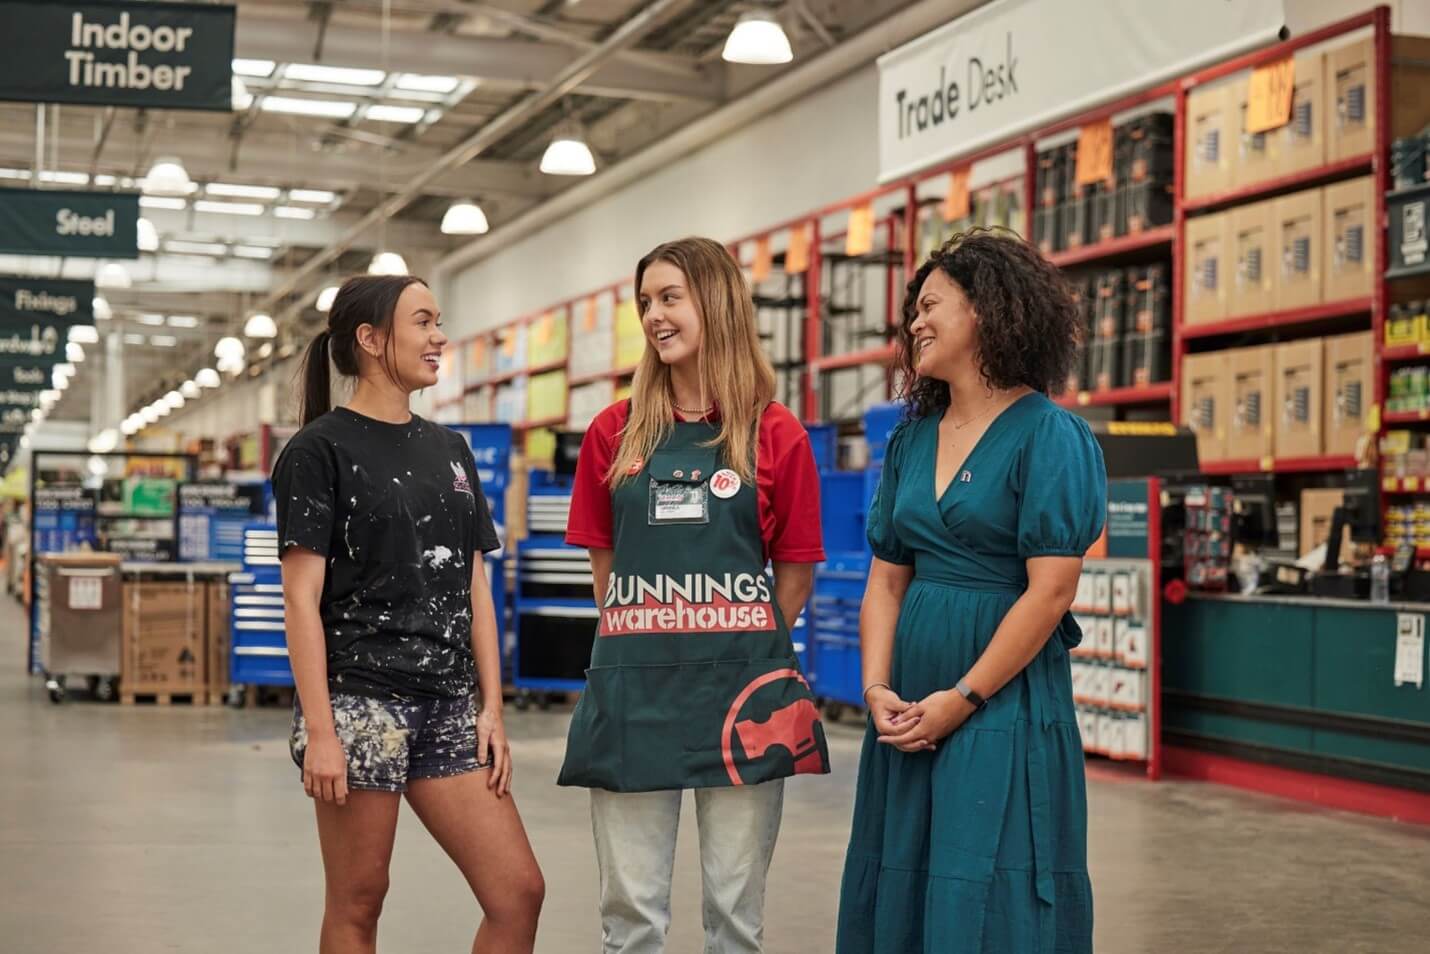 Female tradeswoman, female Bunnings employee and Lisa Martello from the NAWIC Diversity & Inclusion Portfolio standing inside a Bunnings store talking and smiling amongst each other.